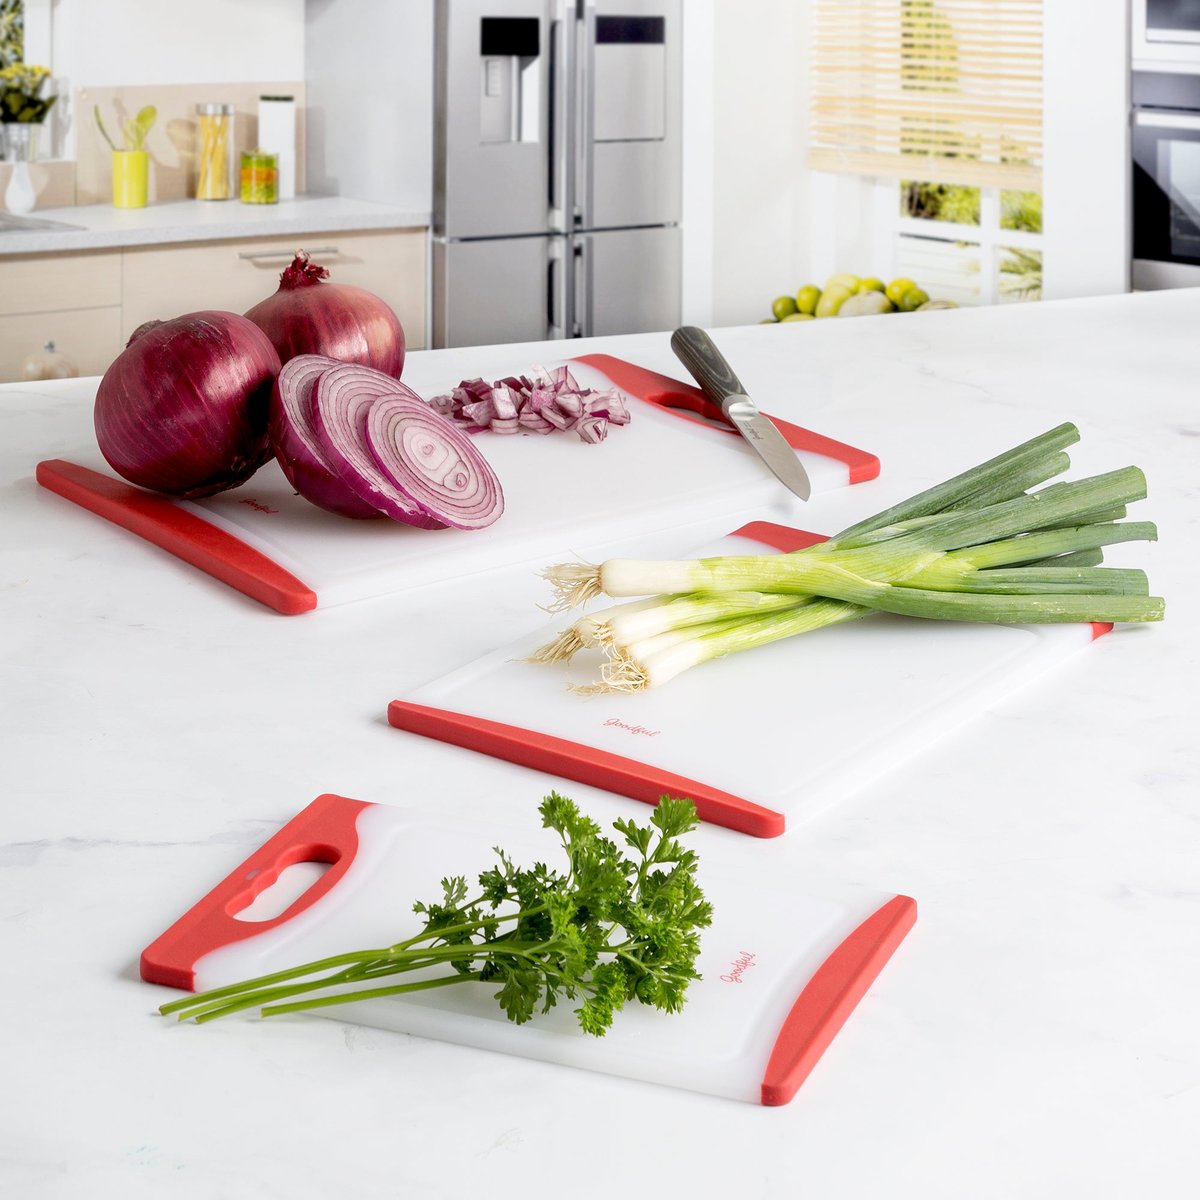 https://images.verishop.com/goodful-kitchen-goodful-cutting-board-3-piece-set-non-slip-edges-dishwasher-safe-multiple-sizes-red/M00741393576269-1217602121?auto=format&cs=strip&fit=max&w=1200